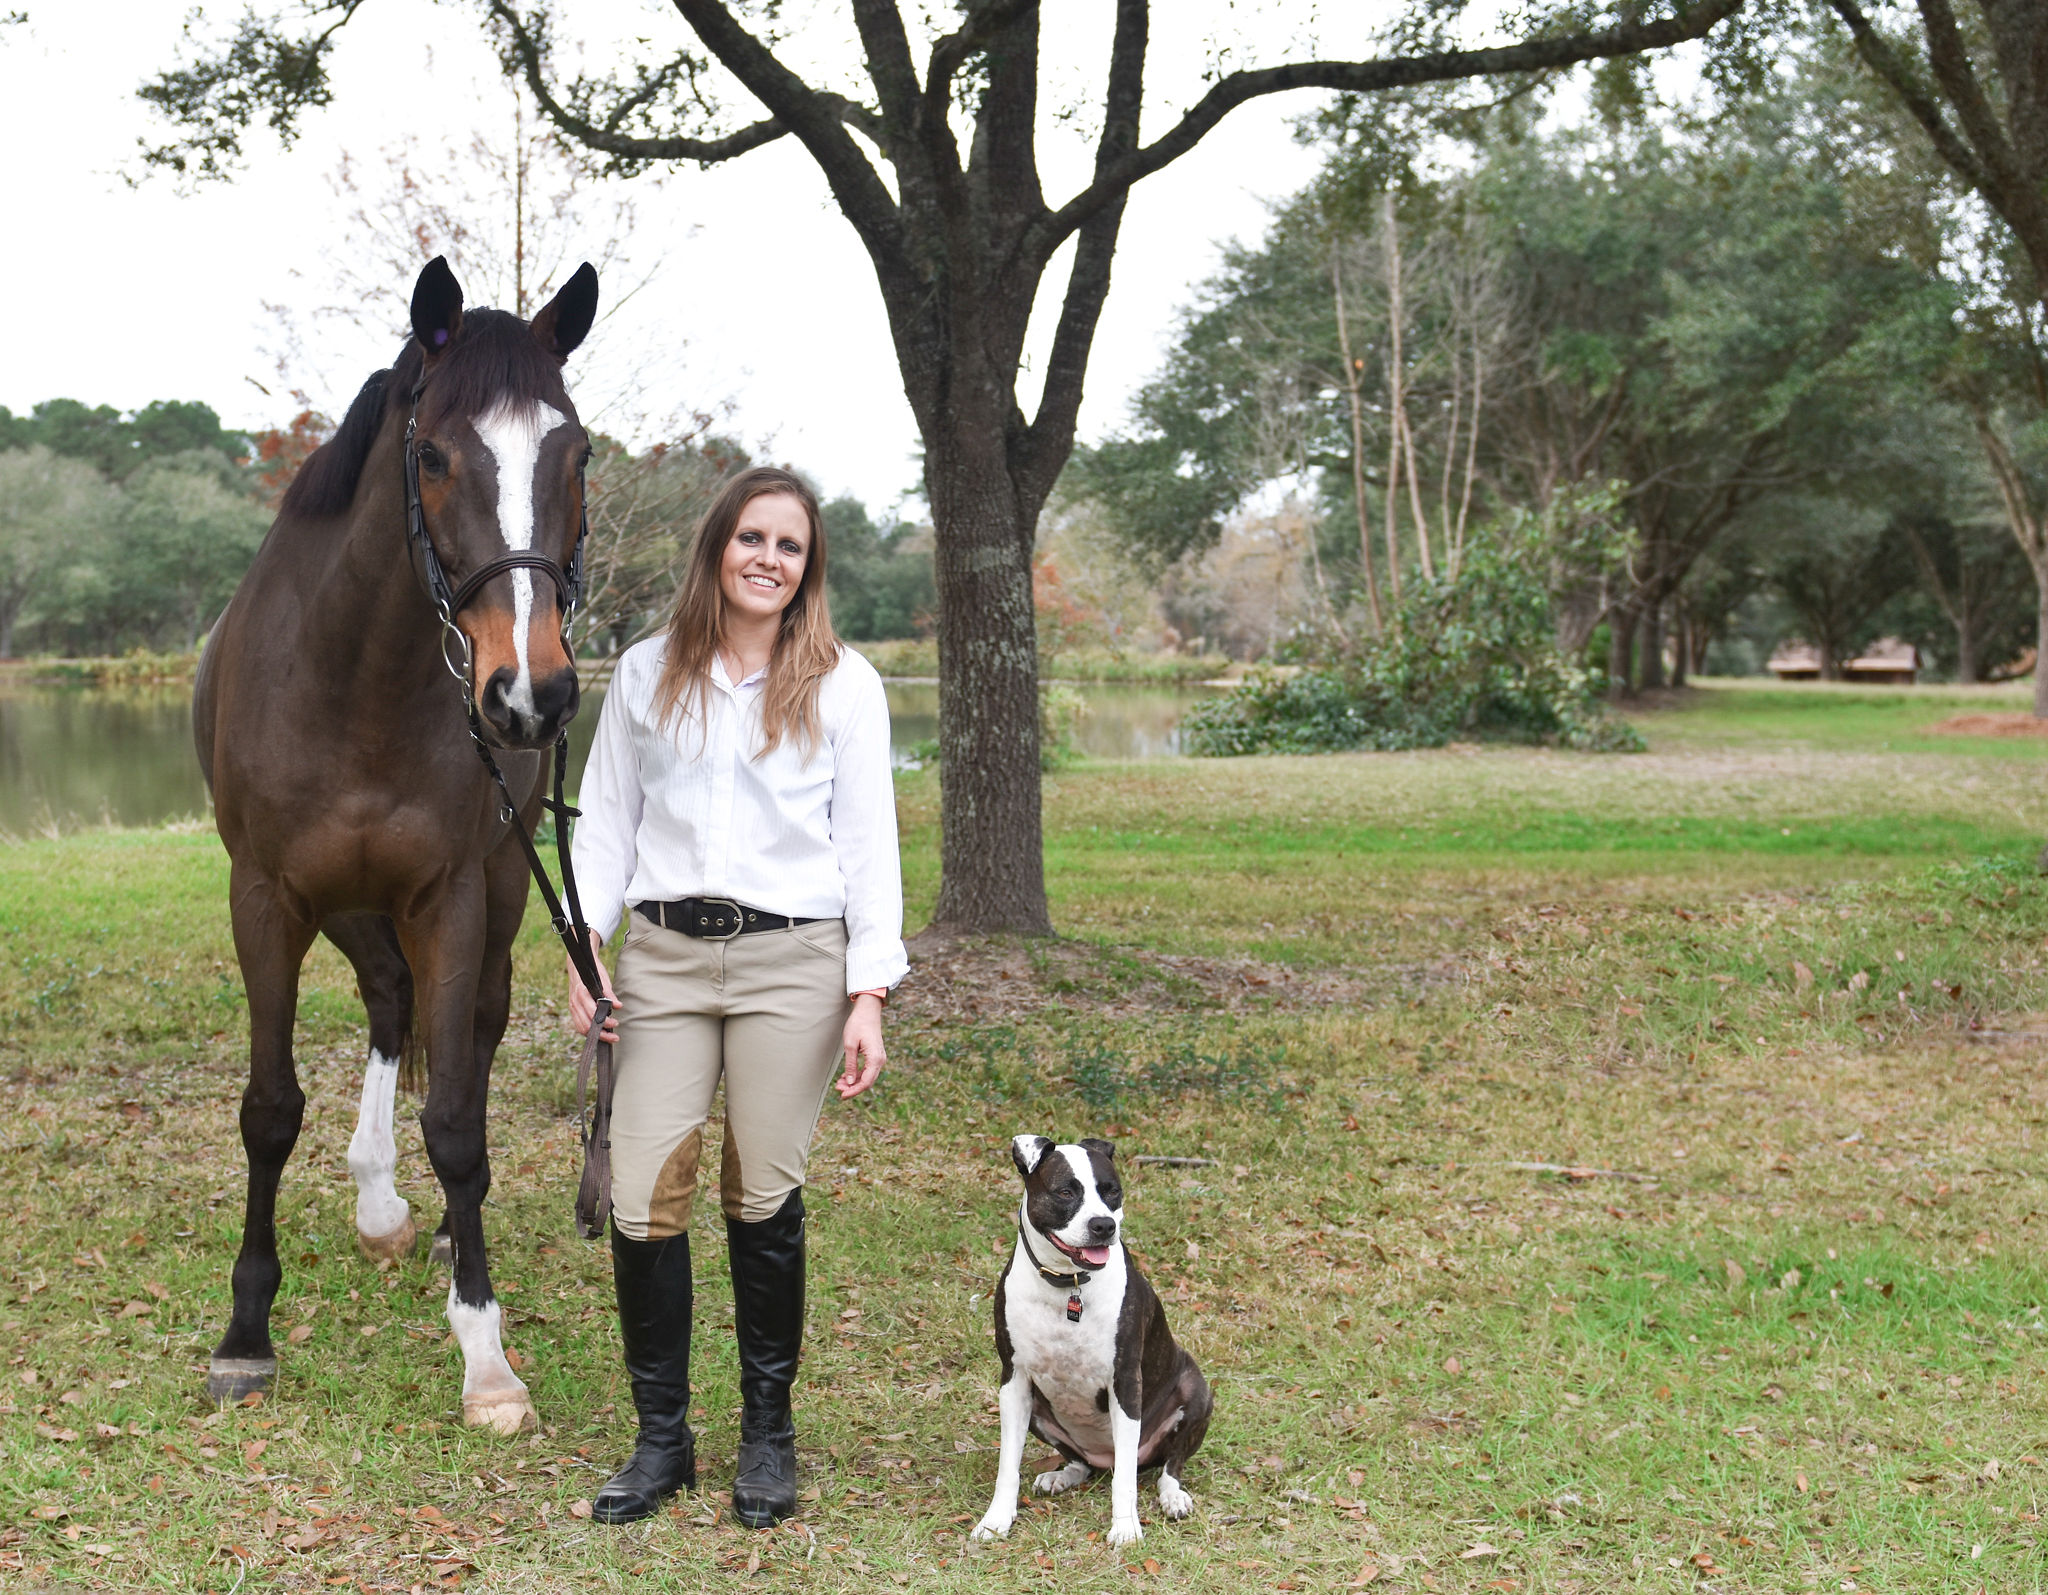 Me standing next to my horse and dog.